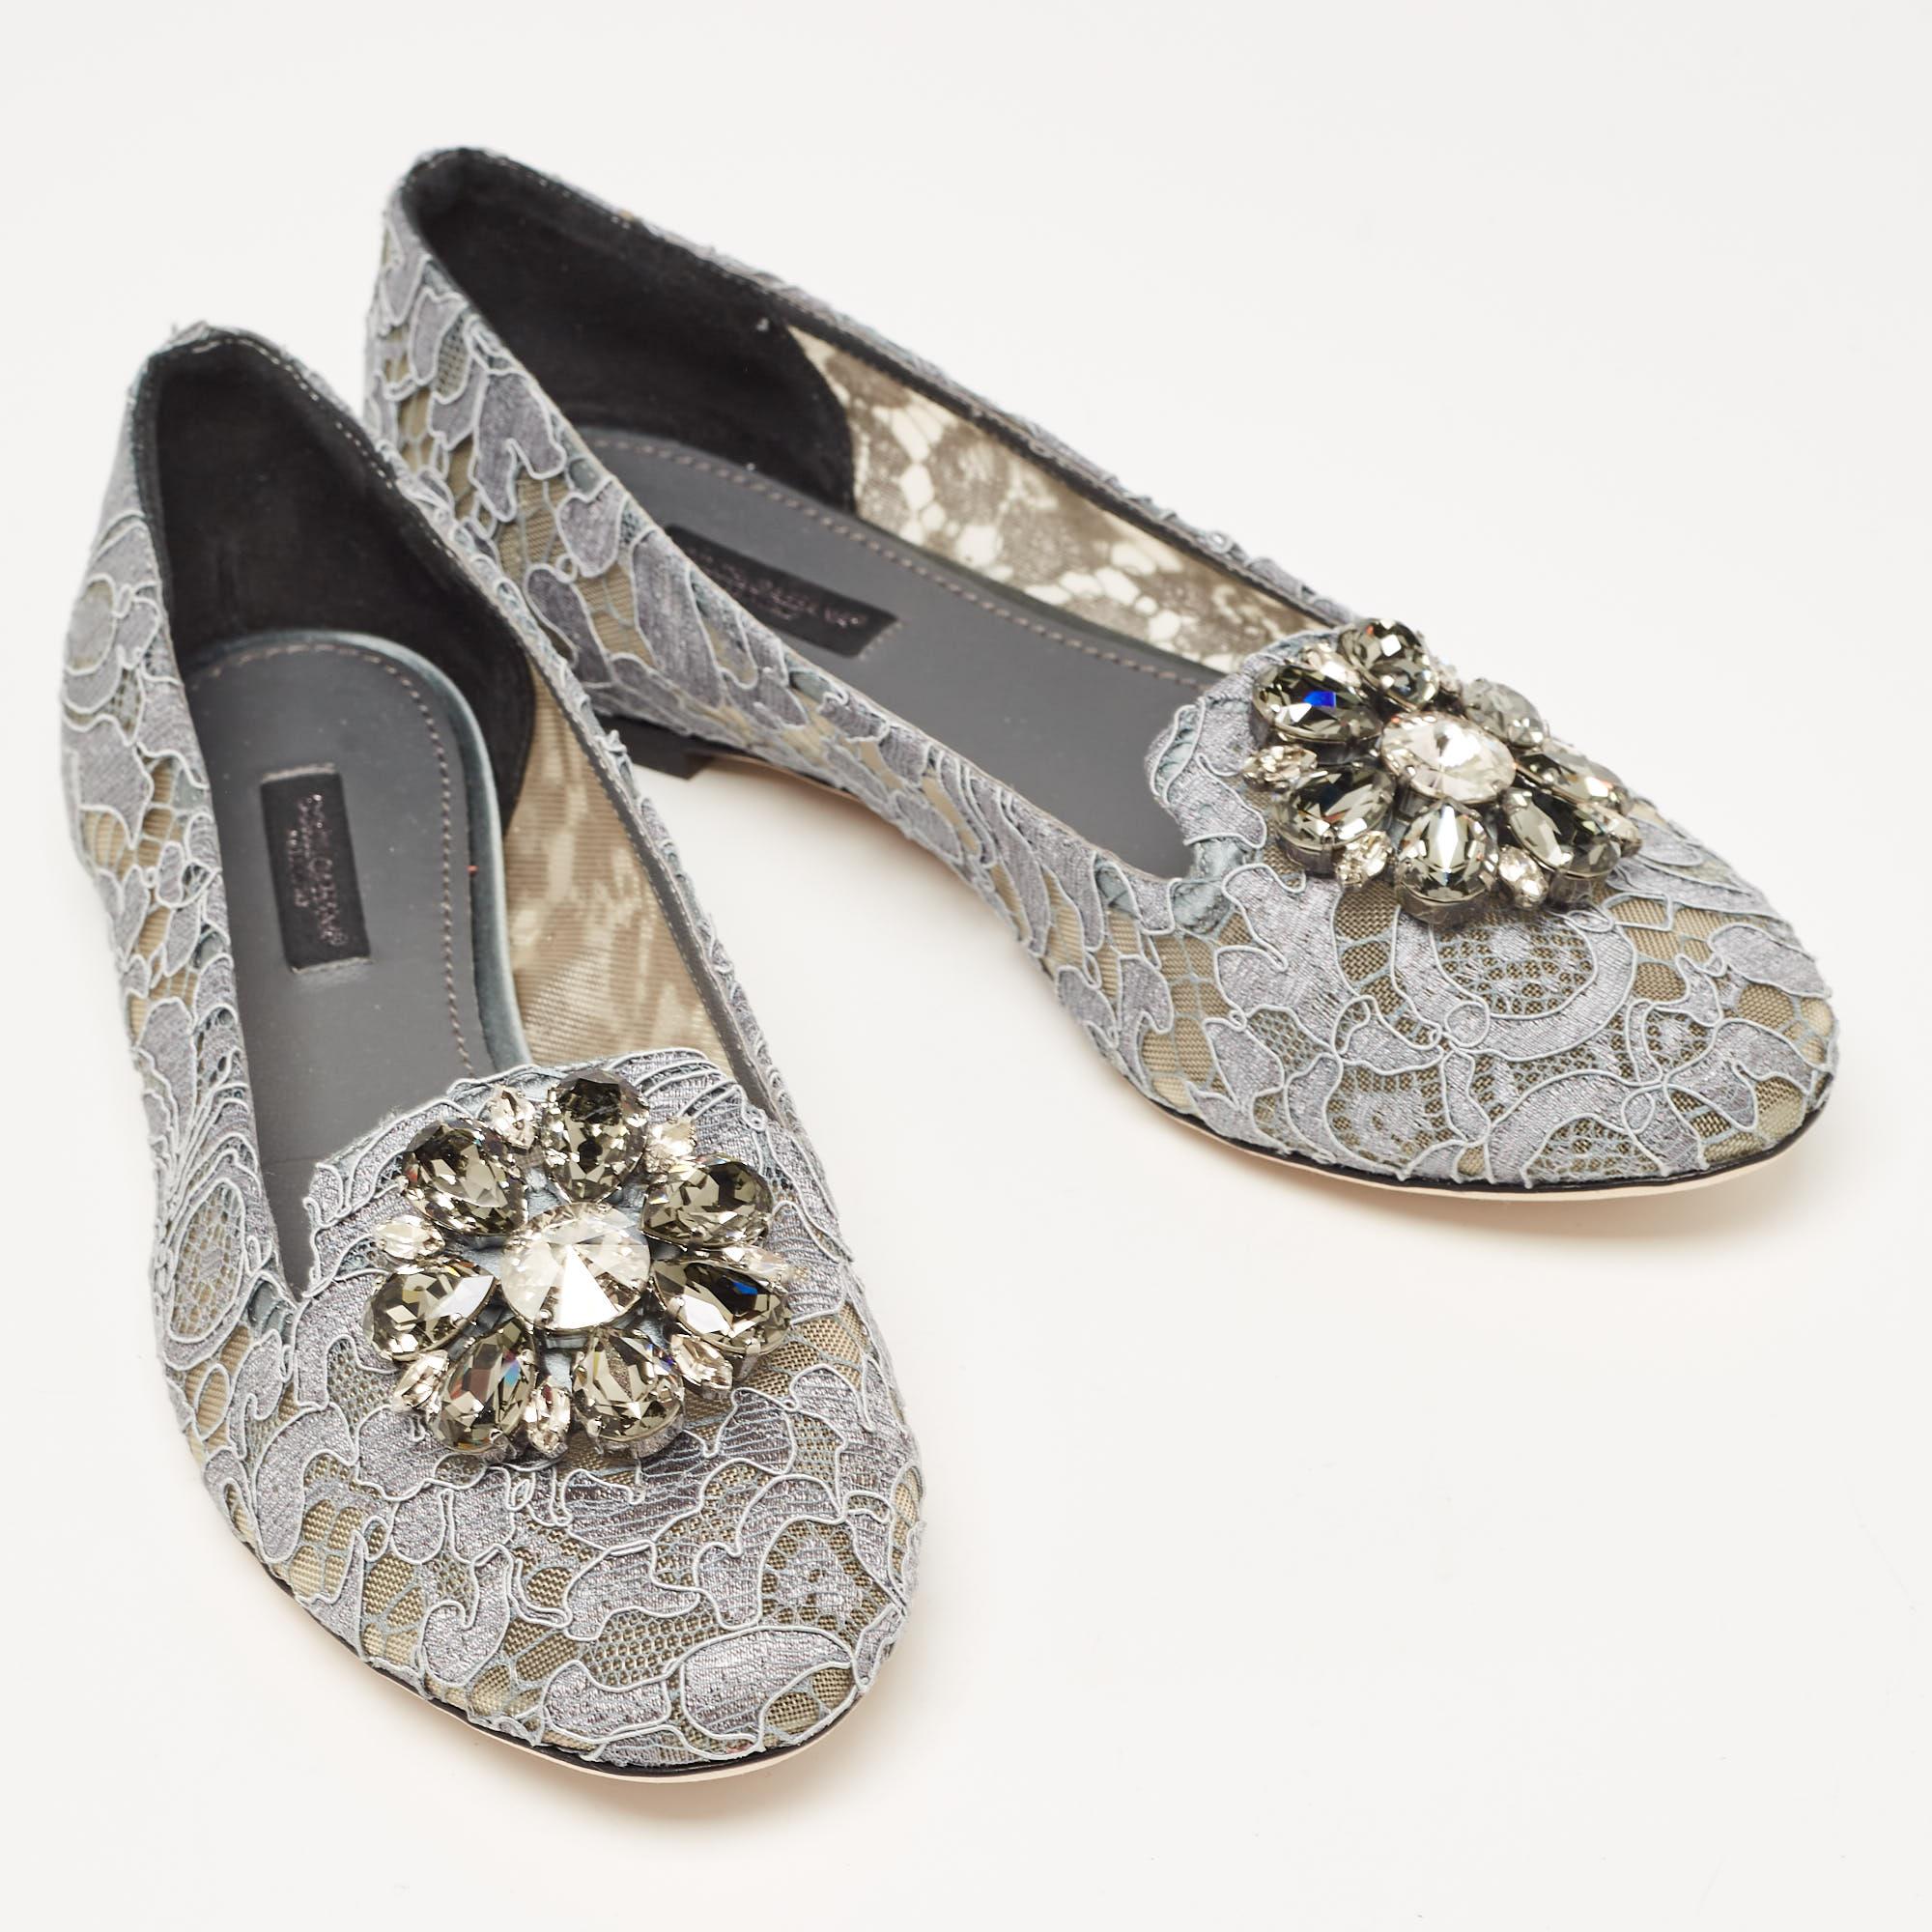 Let comfort and classic style be yours with these ballet flats from Dolce & Gabbana. Crafted with skill, the high-quality shoes have the perfect construction to take you through the day with utmost ease.

